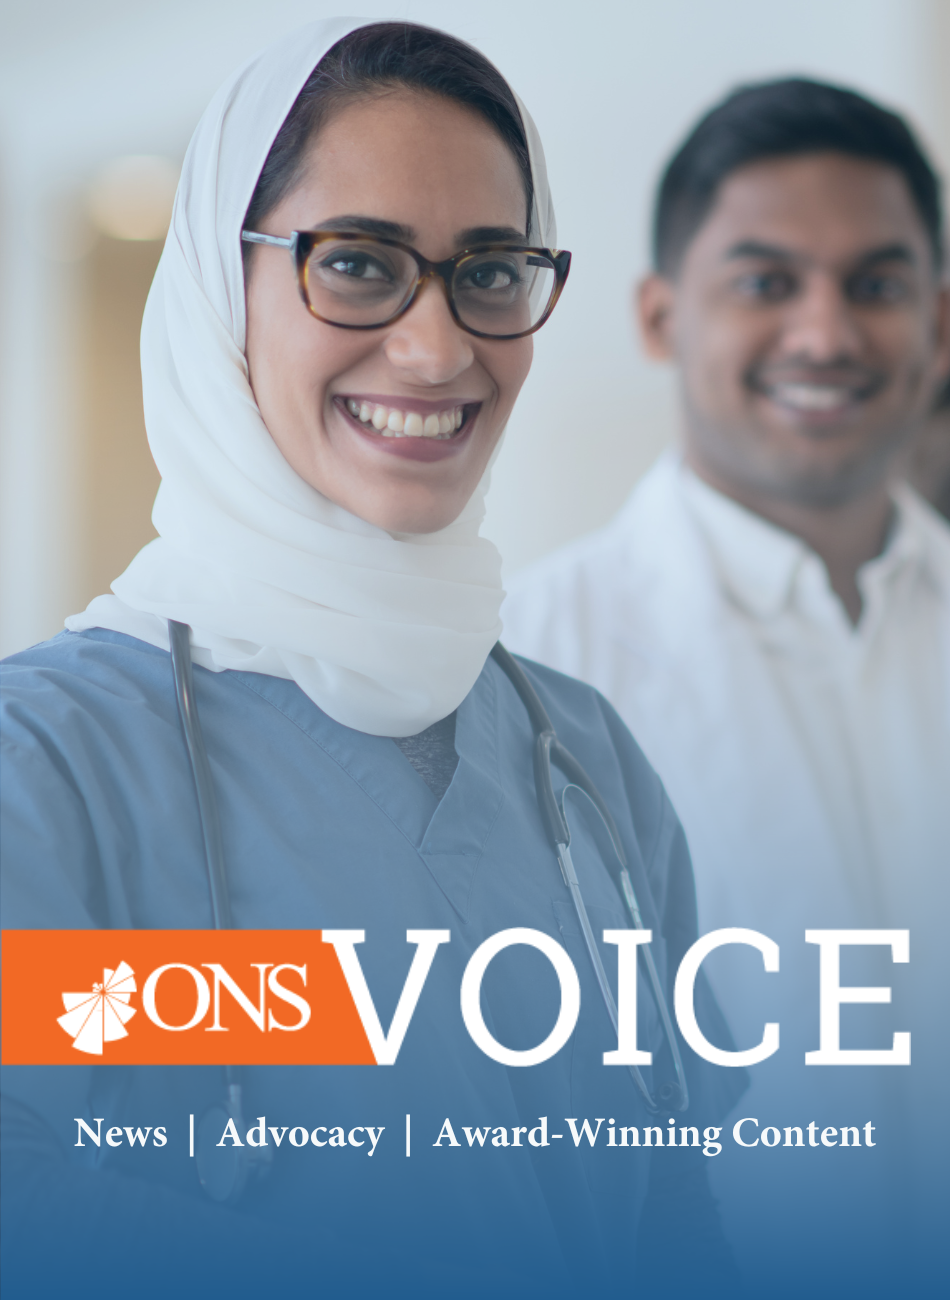 Smiling nurse in hijab, voice logo on the bottom half of image